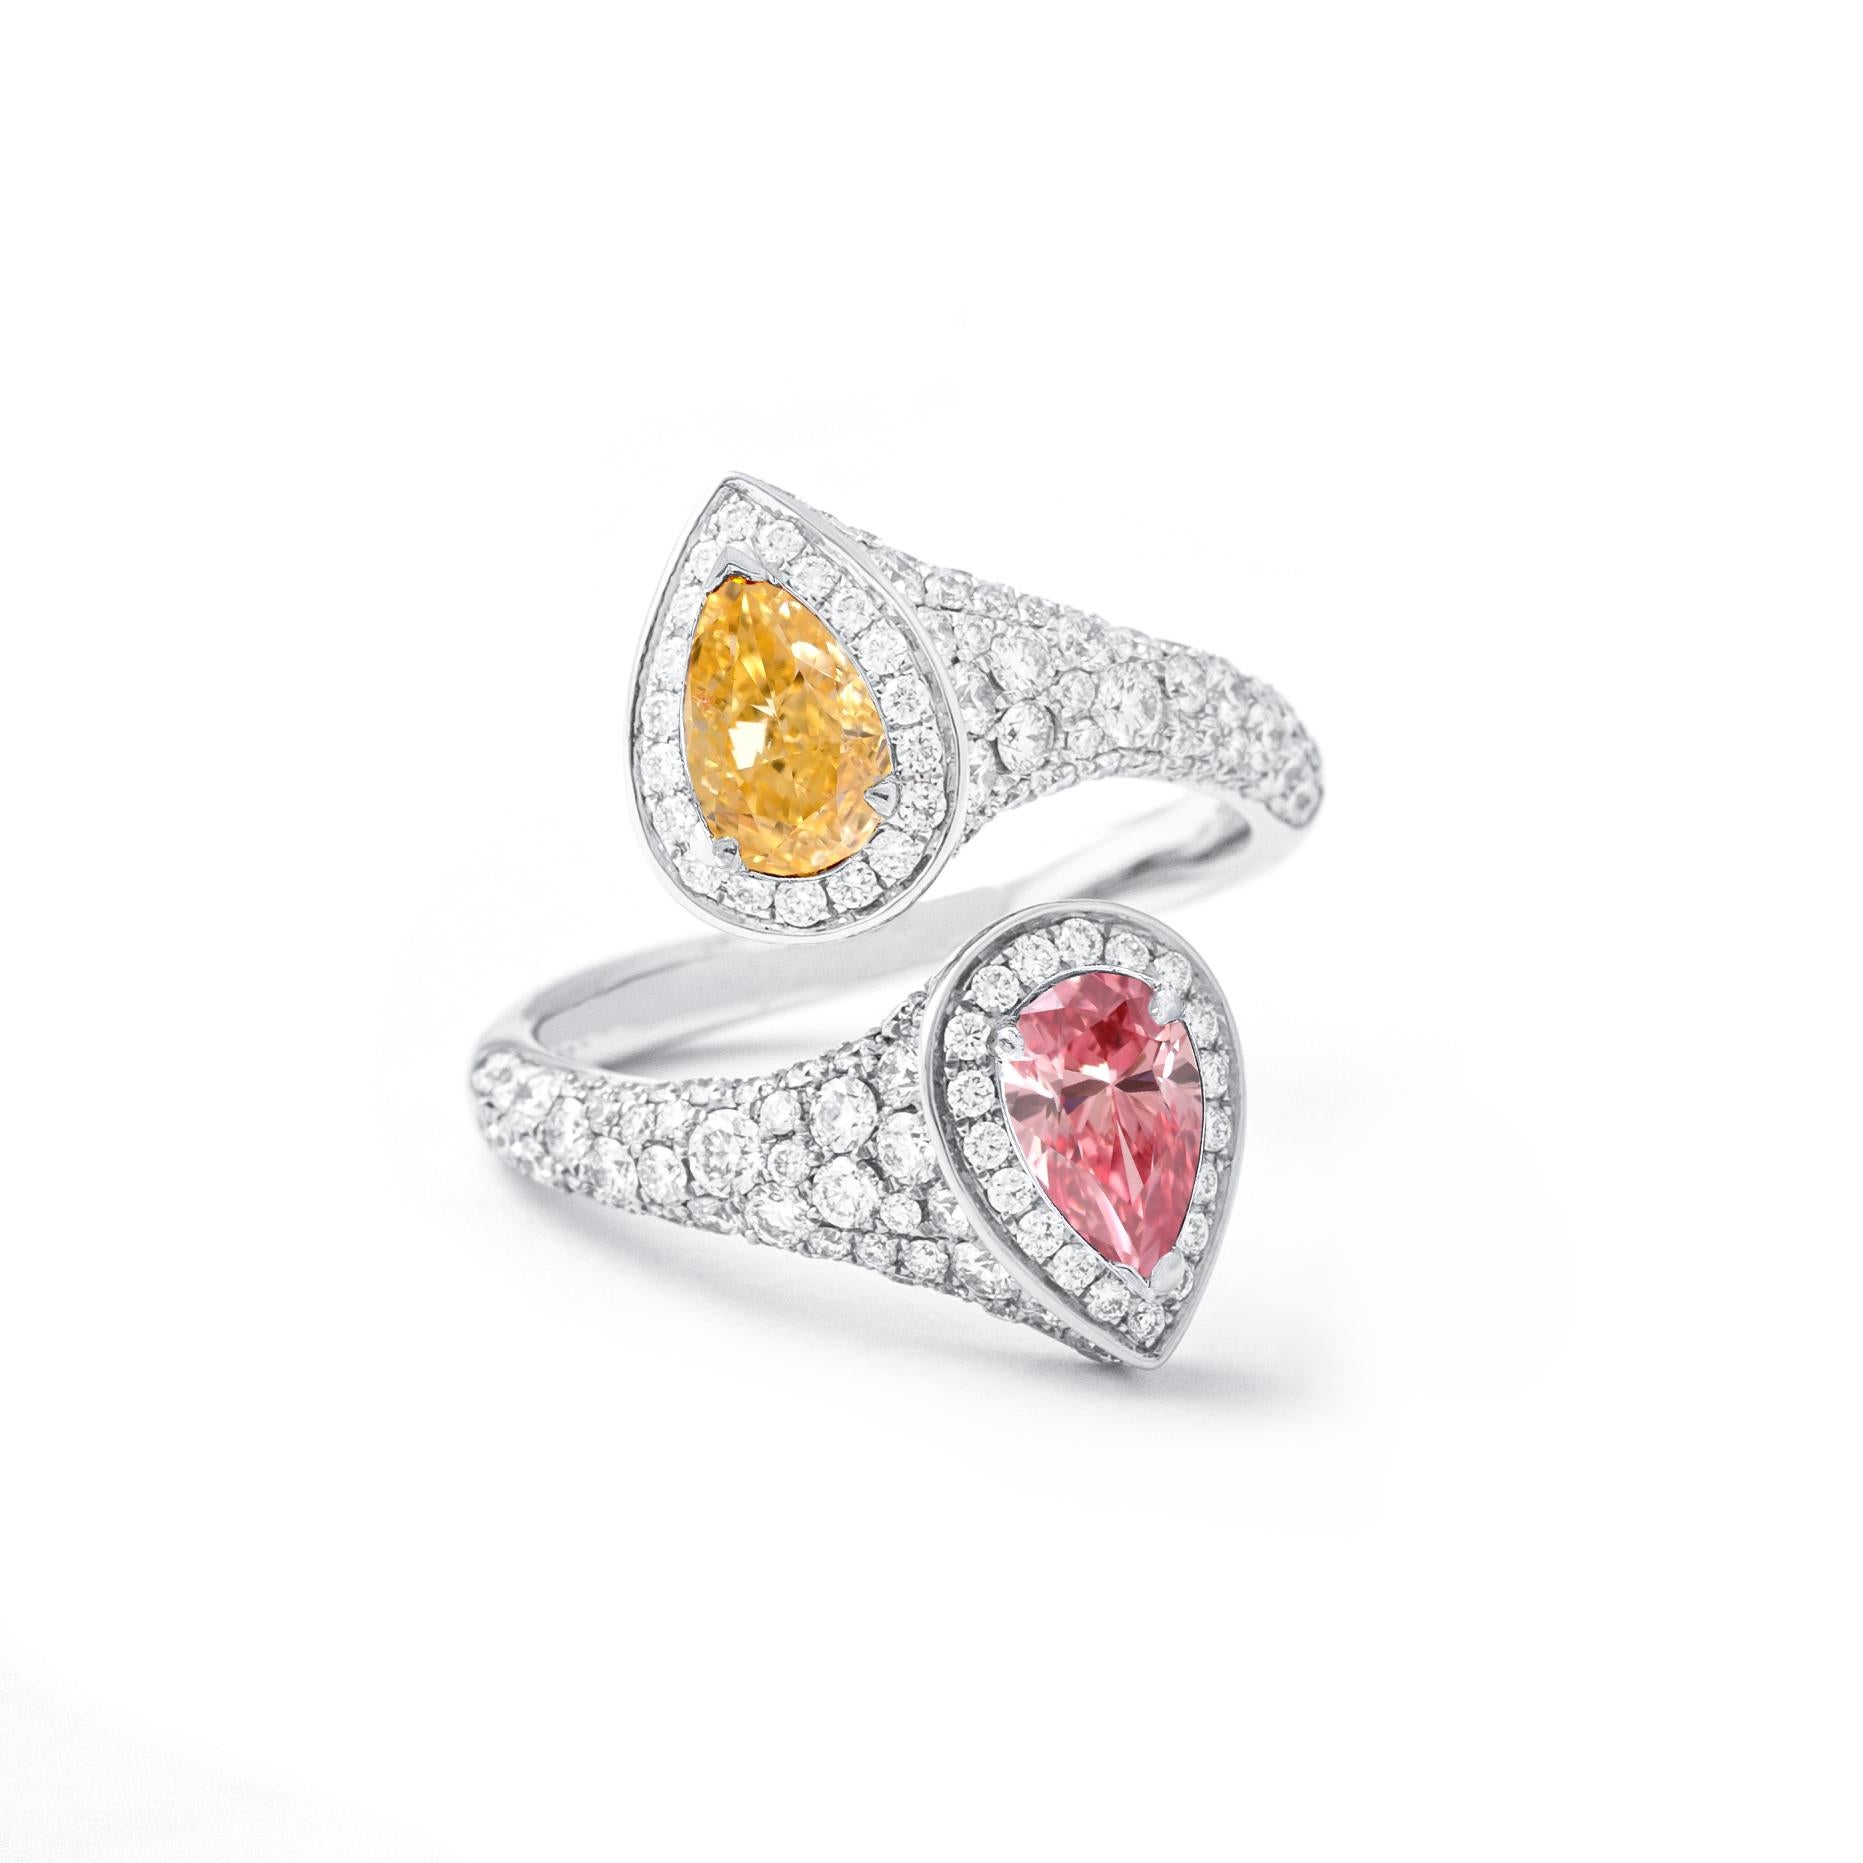 Fancy Intense Pink Natural Diamond 0.36 carat Pear shape, I2 clarity and
Fancy Intense Orange Natural Diamond 0.52 carat Pear shape, Si1 clarity.
According Gia certificate 15830774 and 15830713.
Mounted on Crossover white diamond on white 18K gold